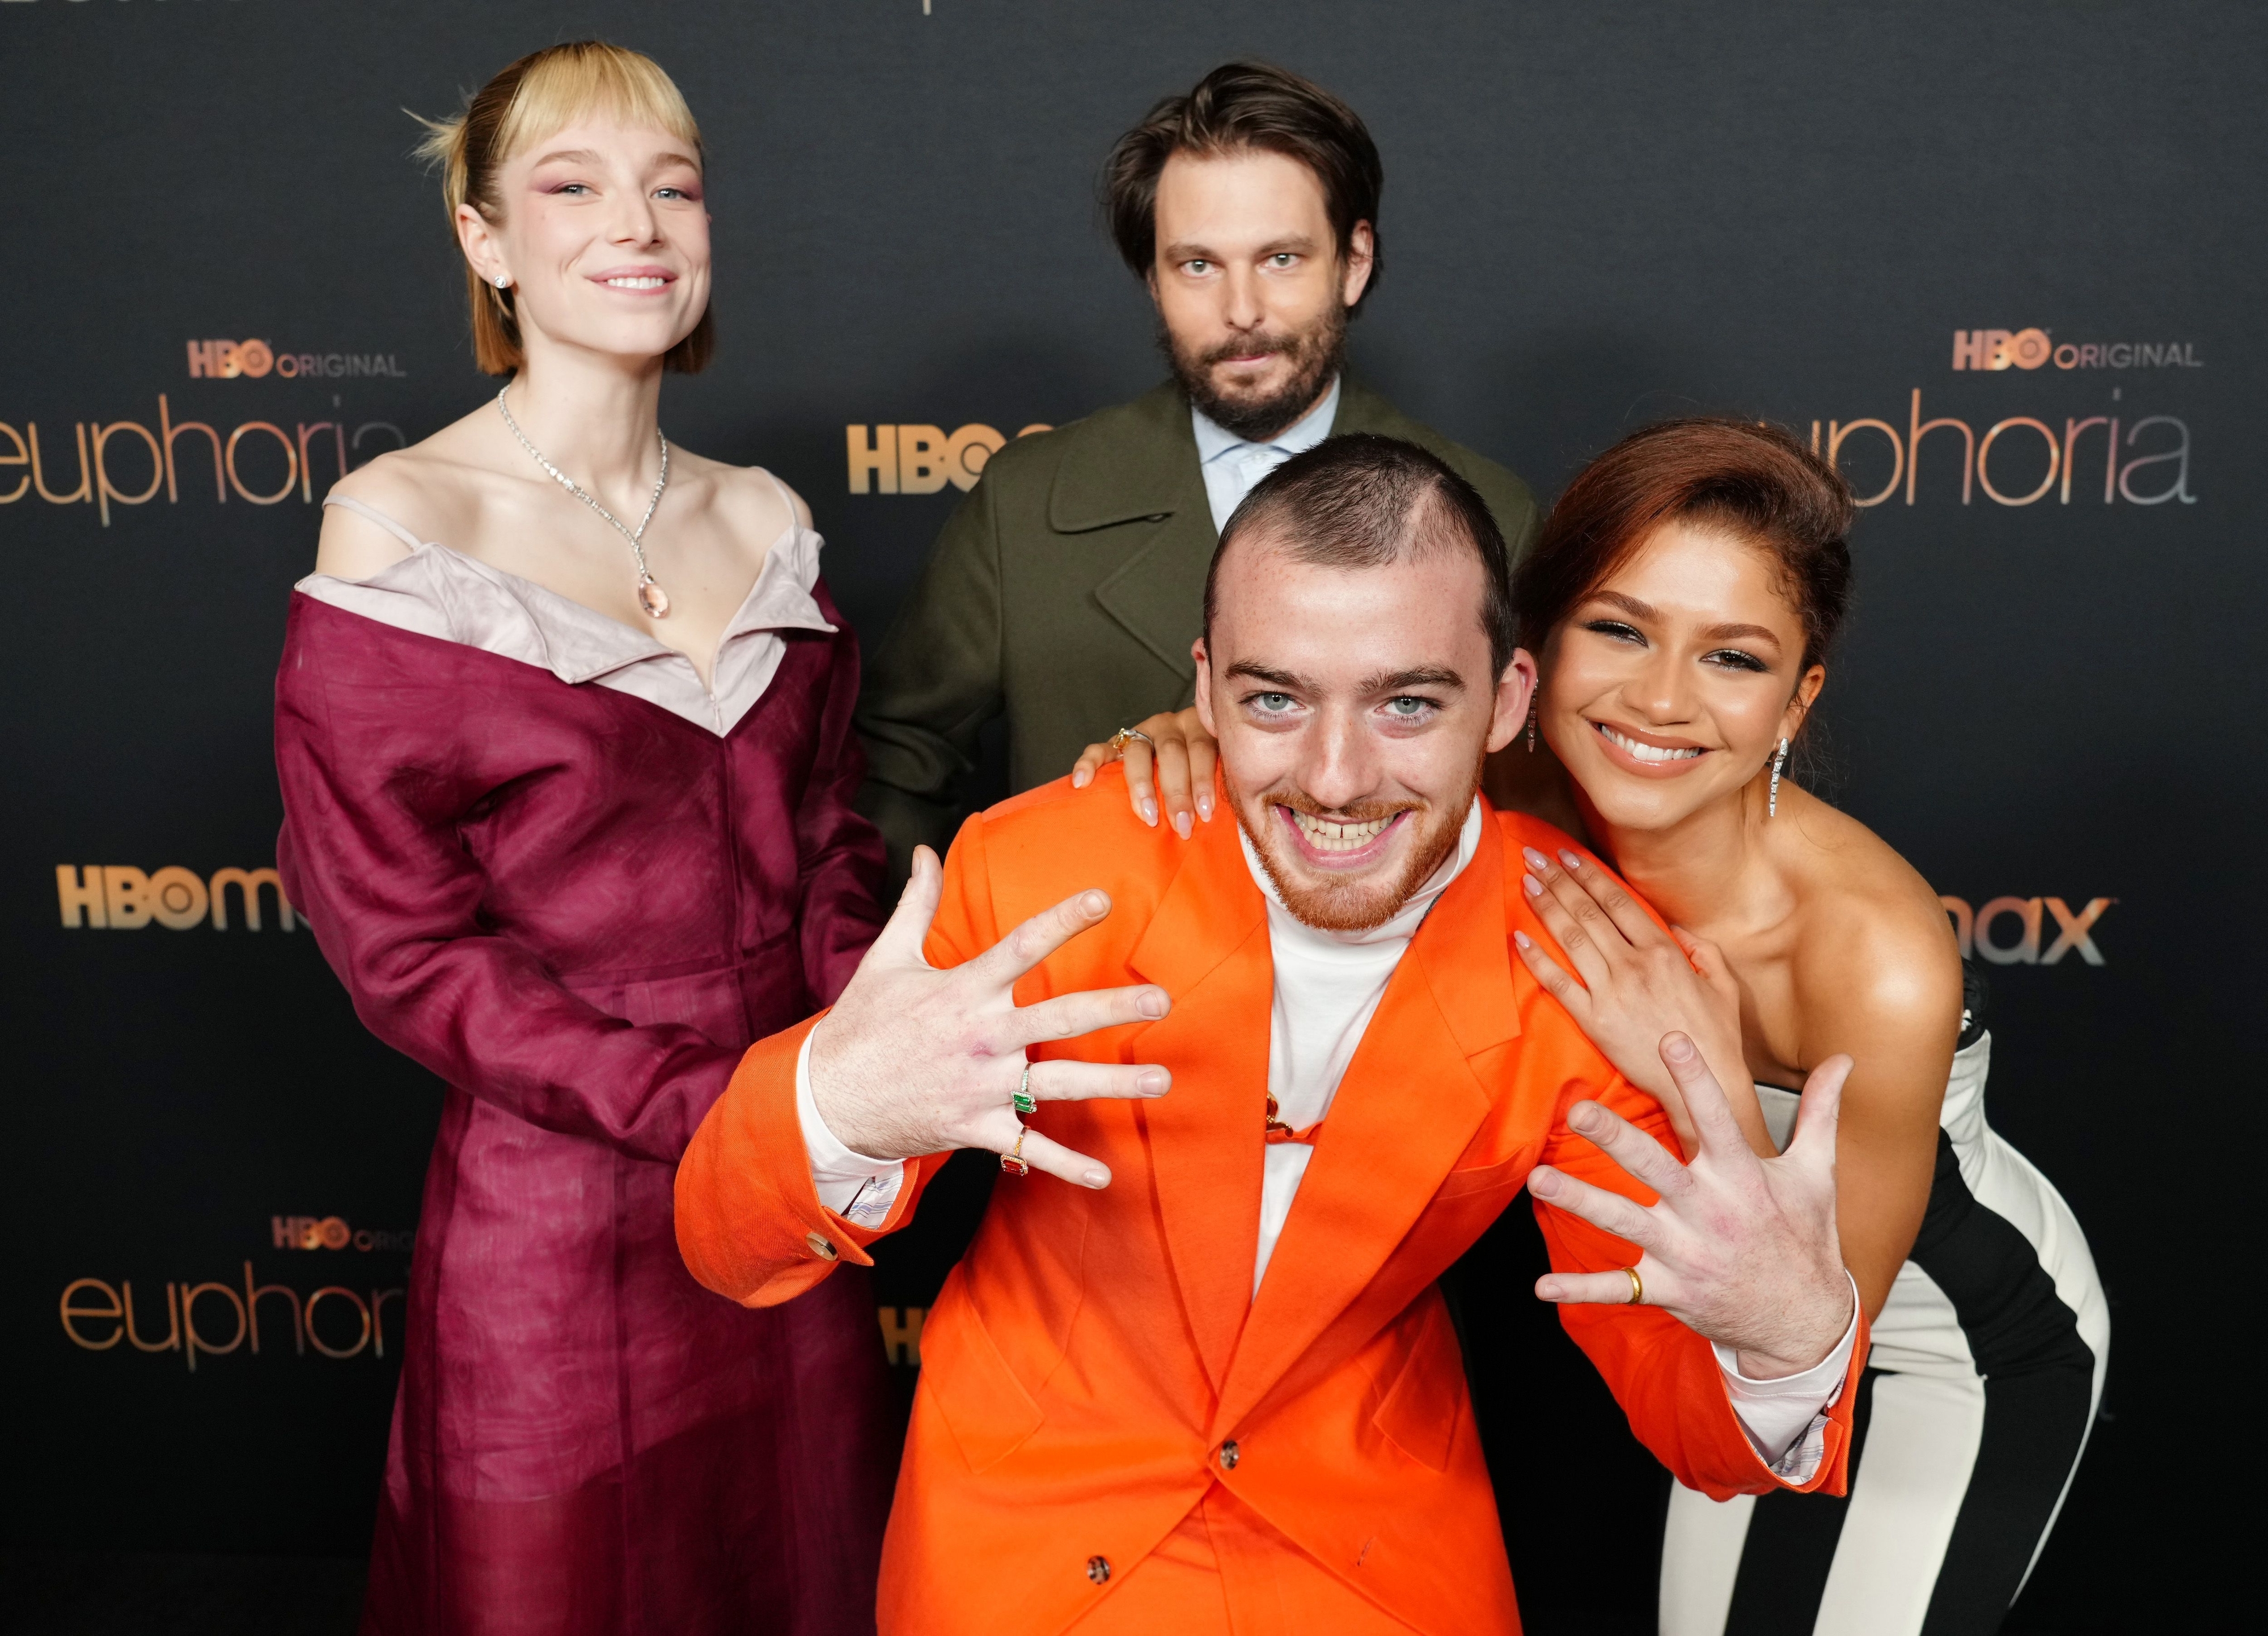 Angus Cloud playfully posing for a photo on the red carpet with Zendaya, Sam Levinson, and Hunter Schafer